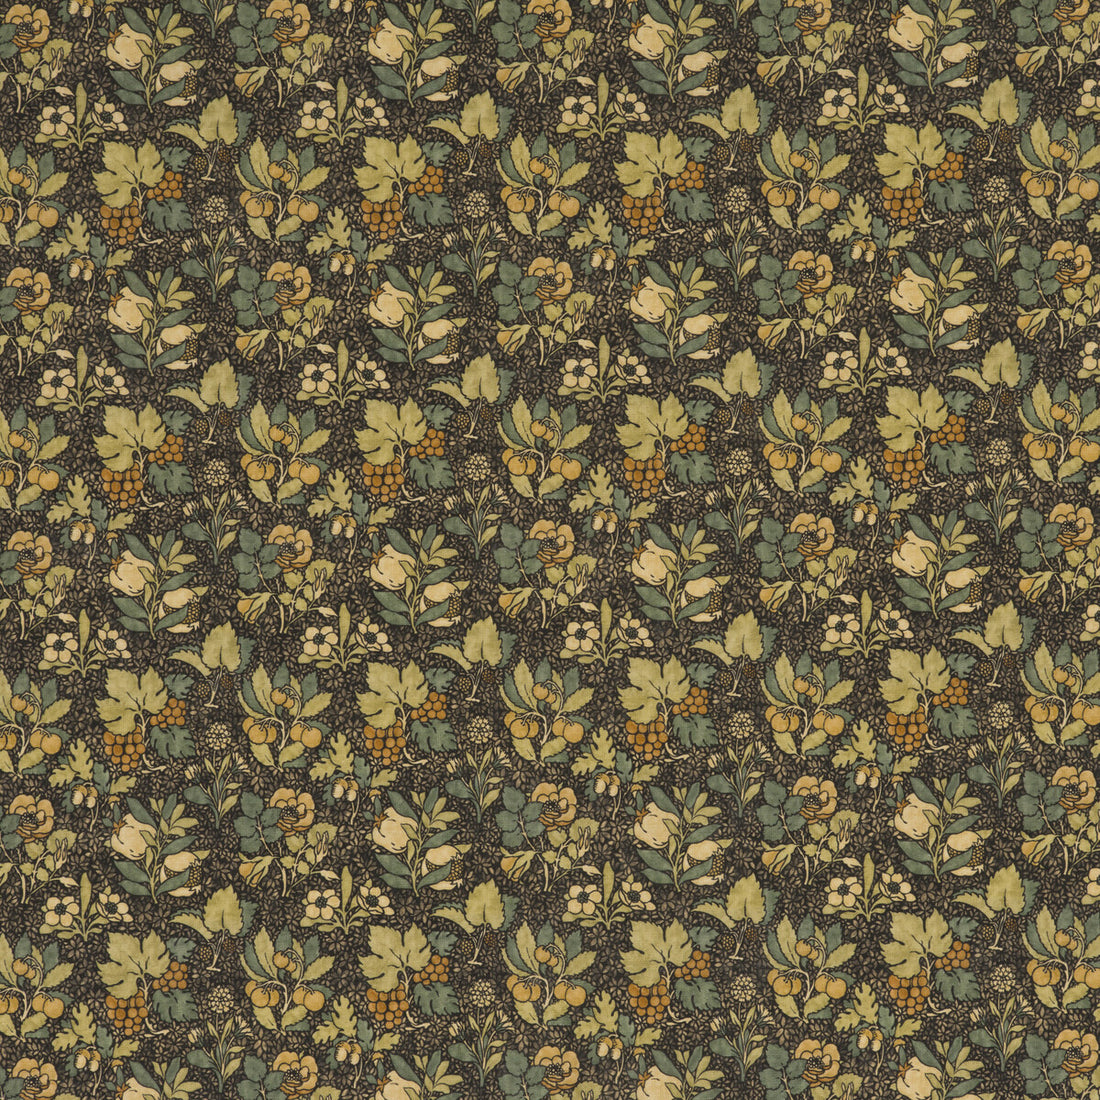 Meadow Fruit fabric in charcoal/green color - pattern BP10619.3.0 - by G P &amp; J Baker in the Originals V collection